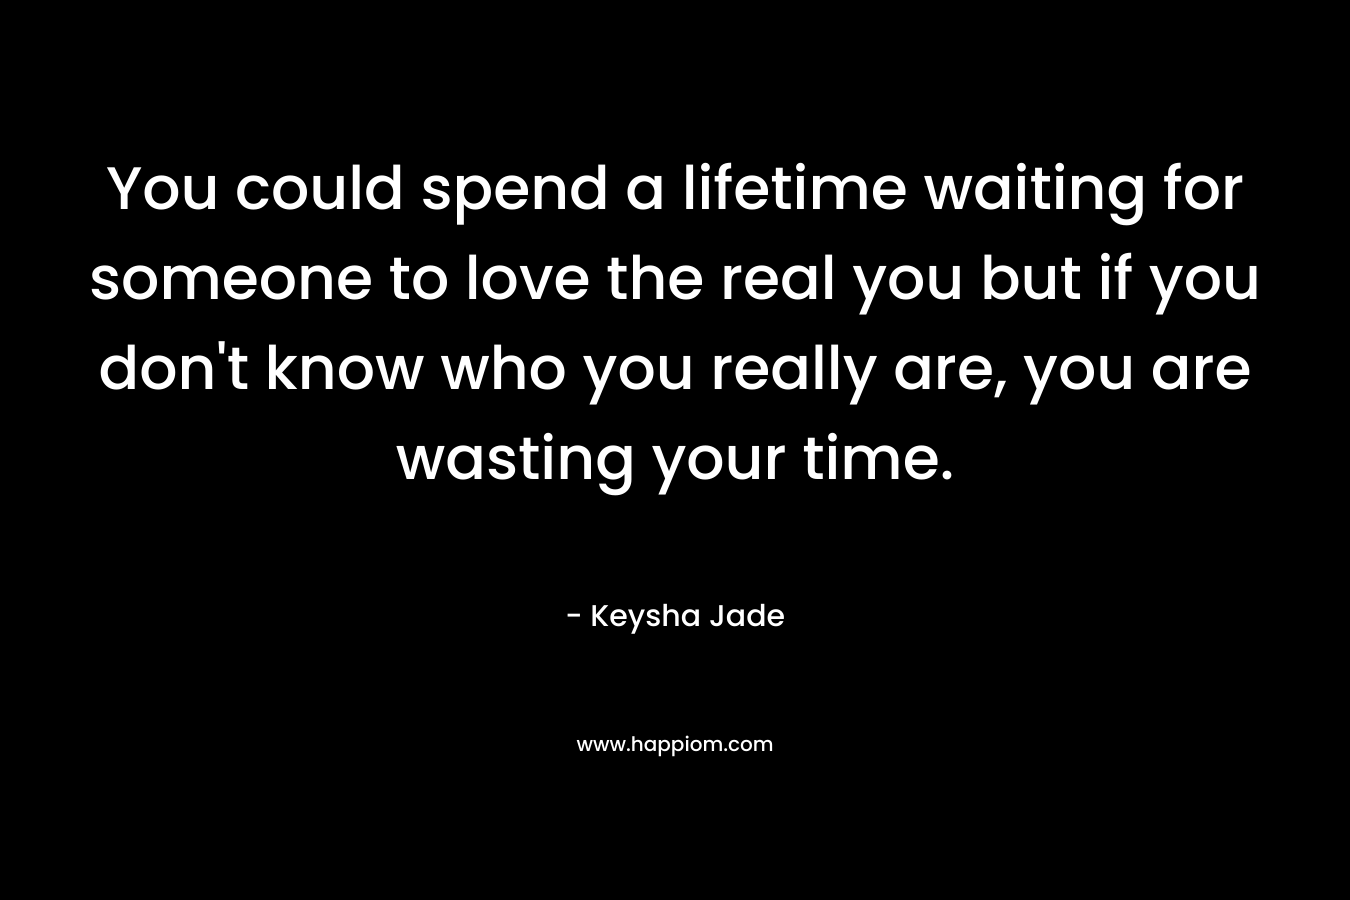 You could spend a lifetime waiting for someone to love the real you but if you don't know who you really are, you are wasting your time.